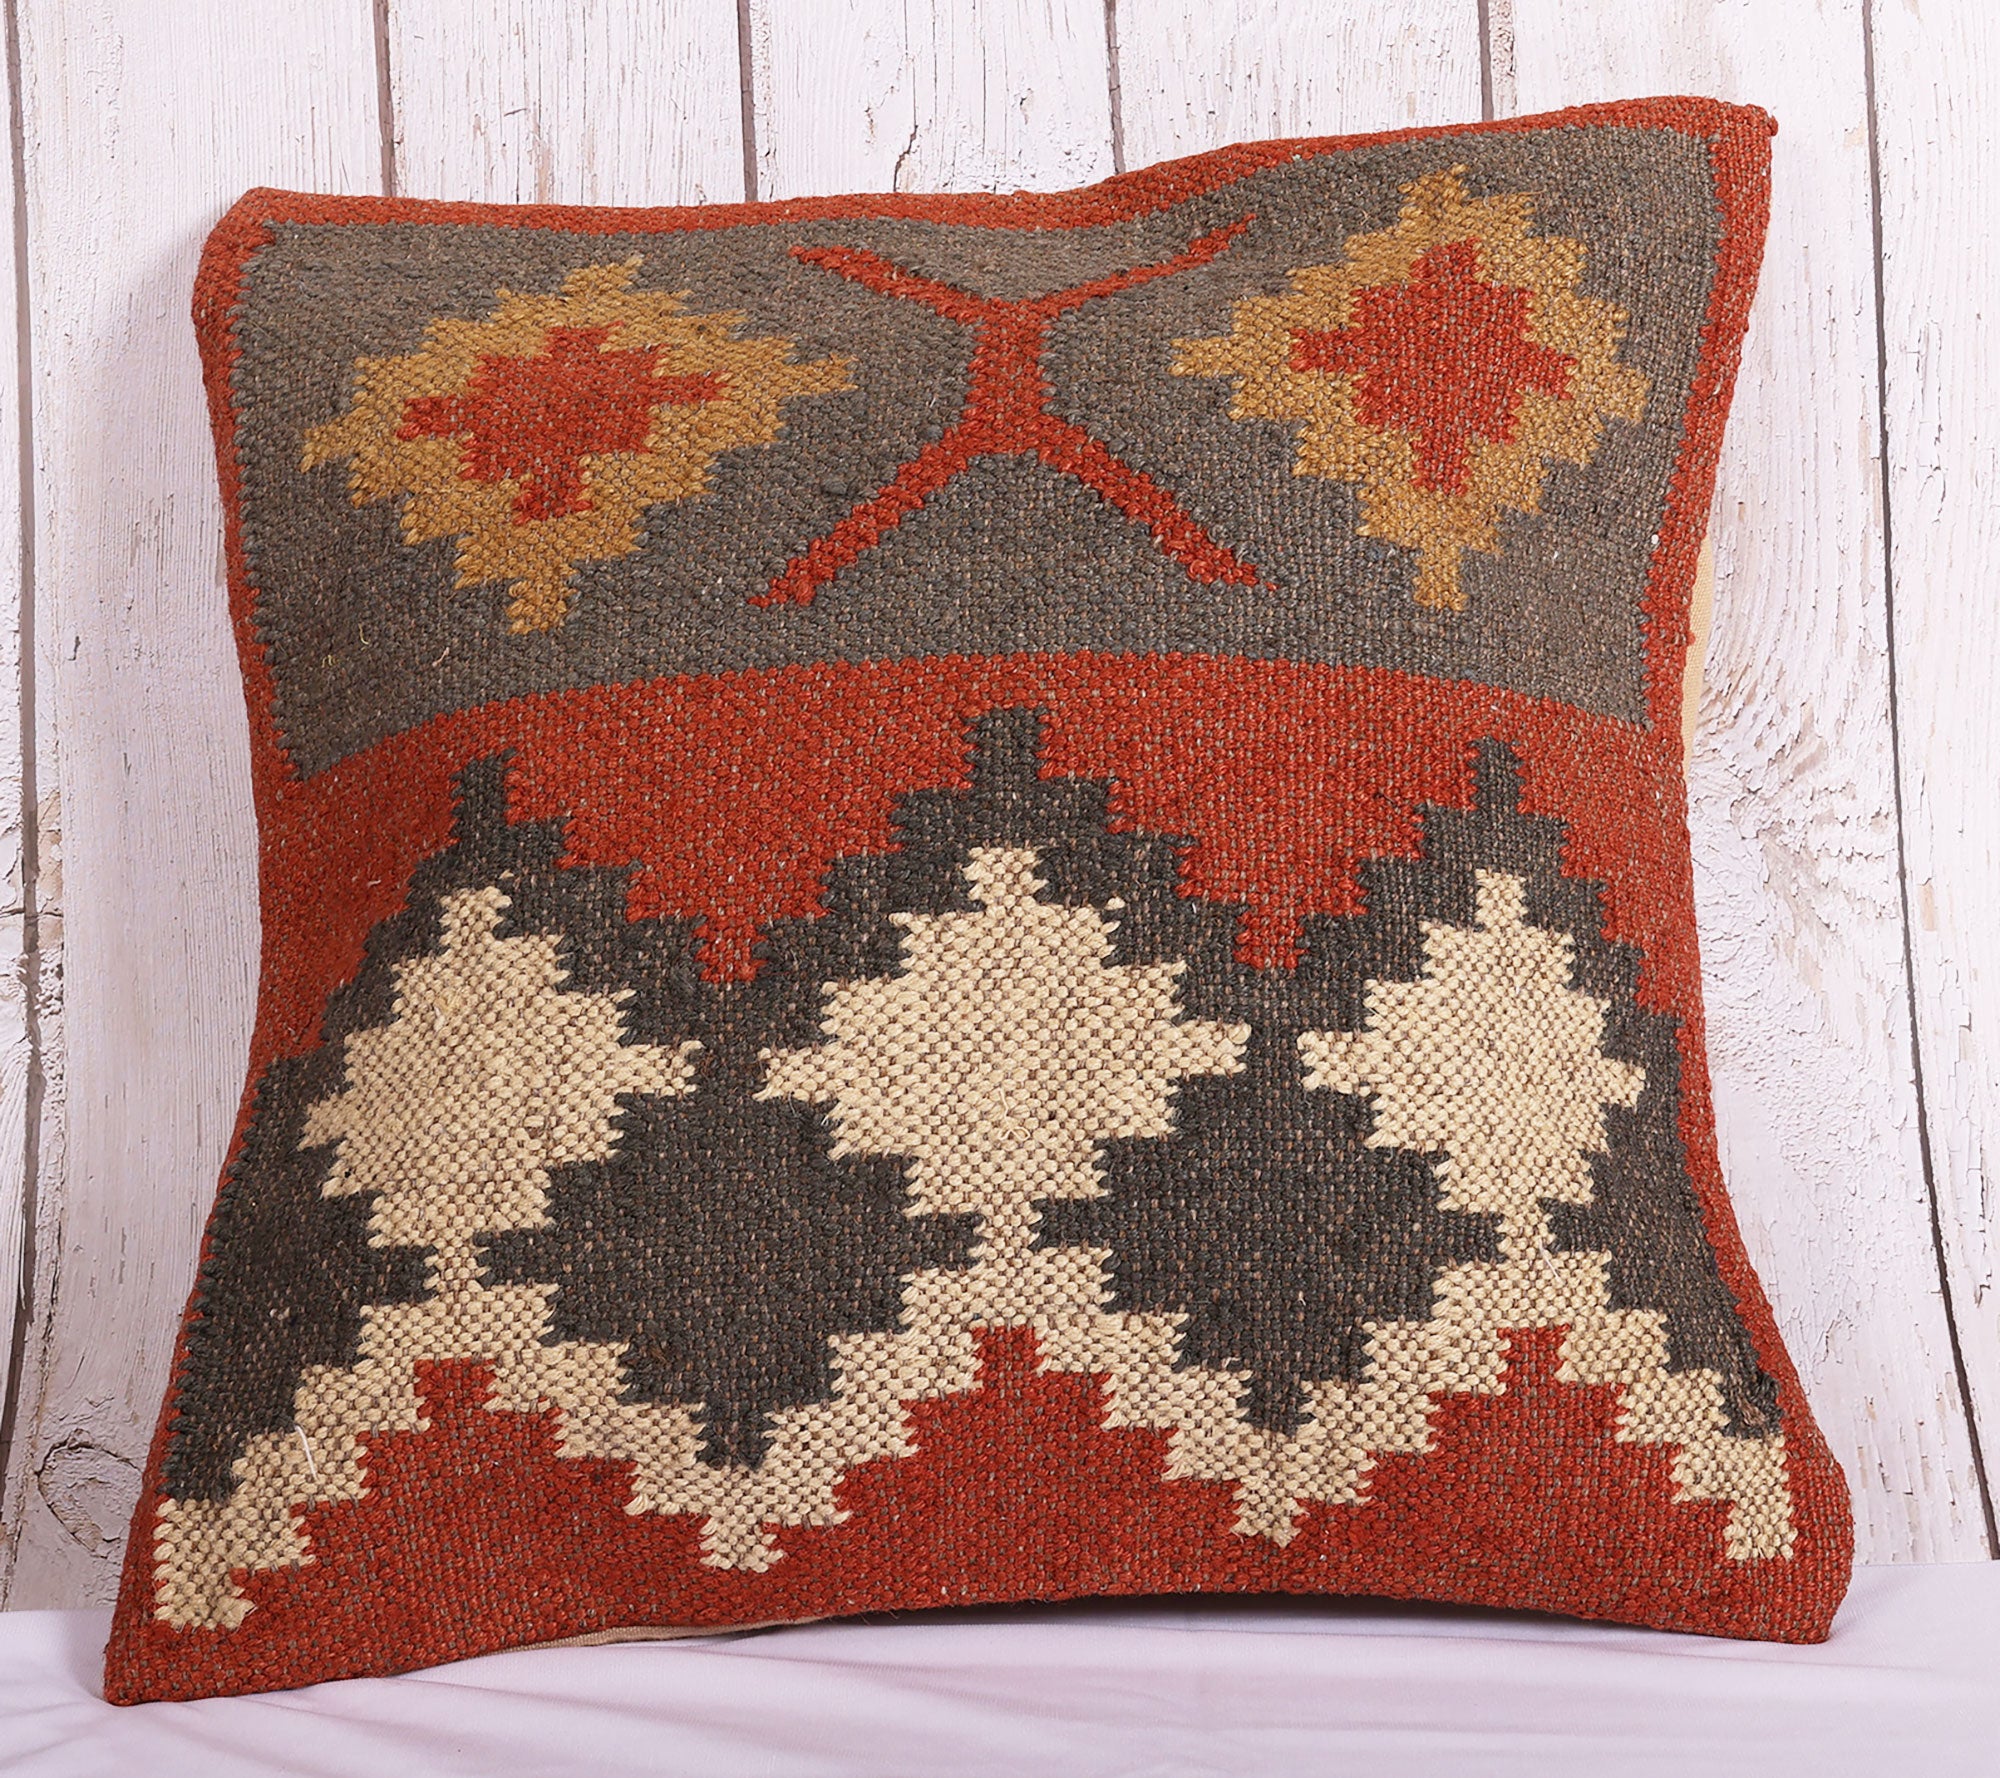 Aesthetic Red Jute Kilim Cushion Cover - 18 x 18 inches | Peacoy